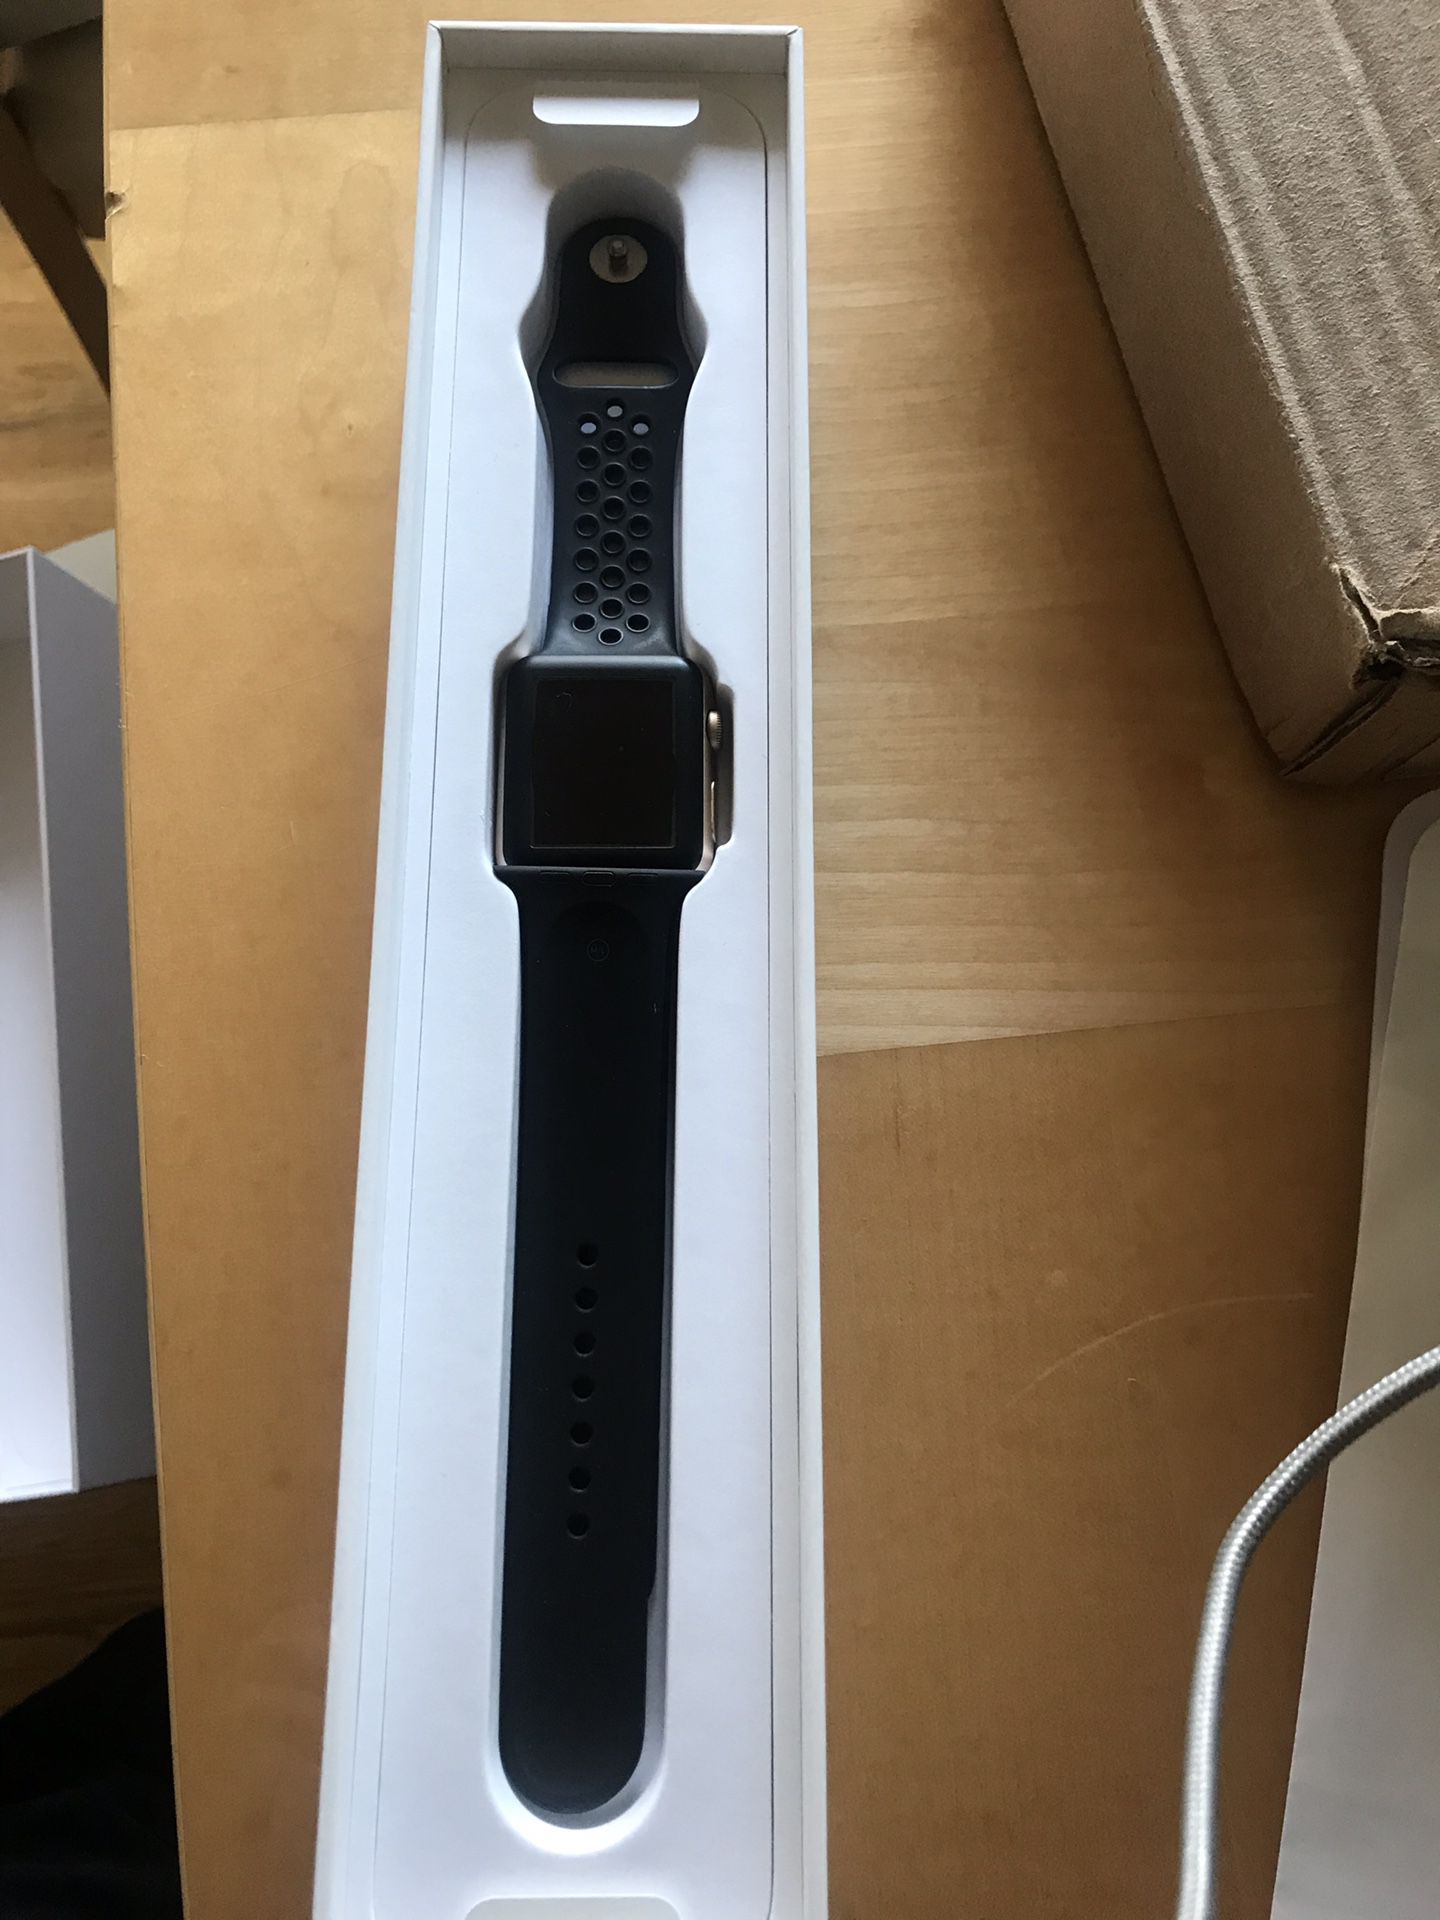 Gold aluminum Apple Watch series 1 with extras